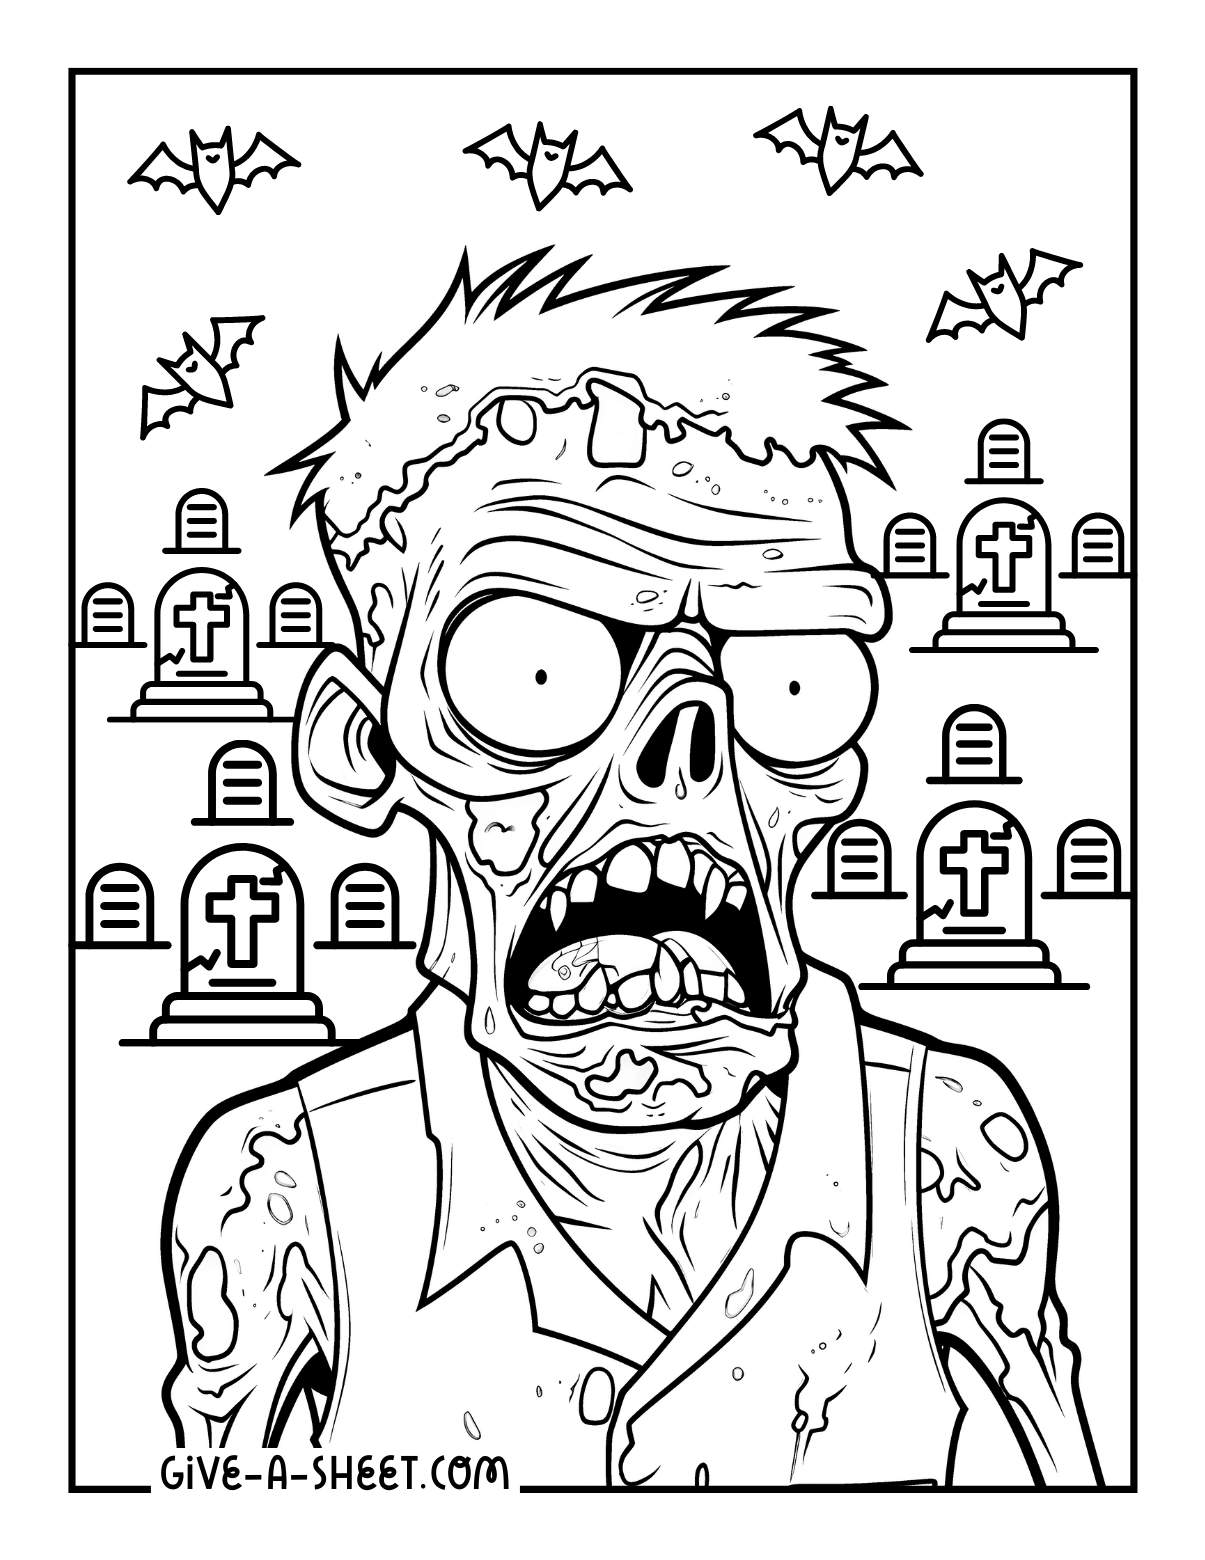 Gross zombie with corpses coloring pages.